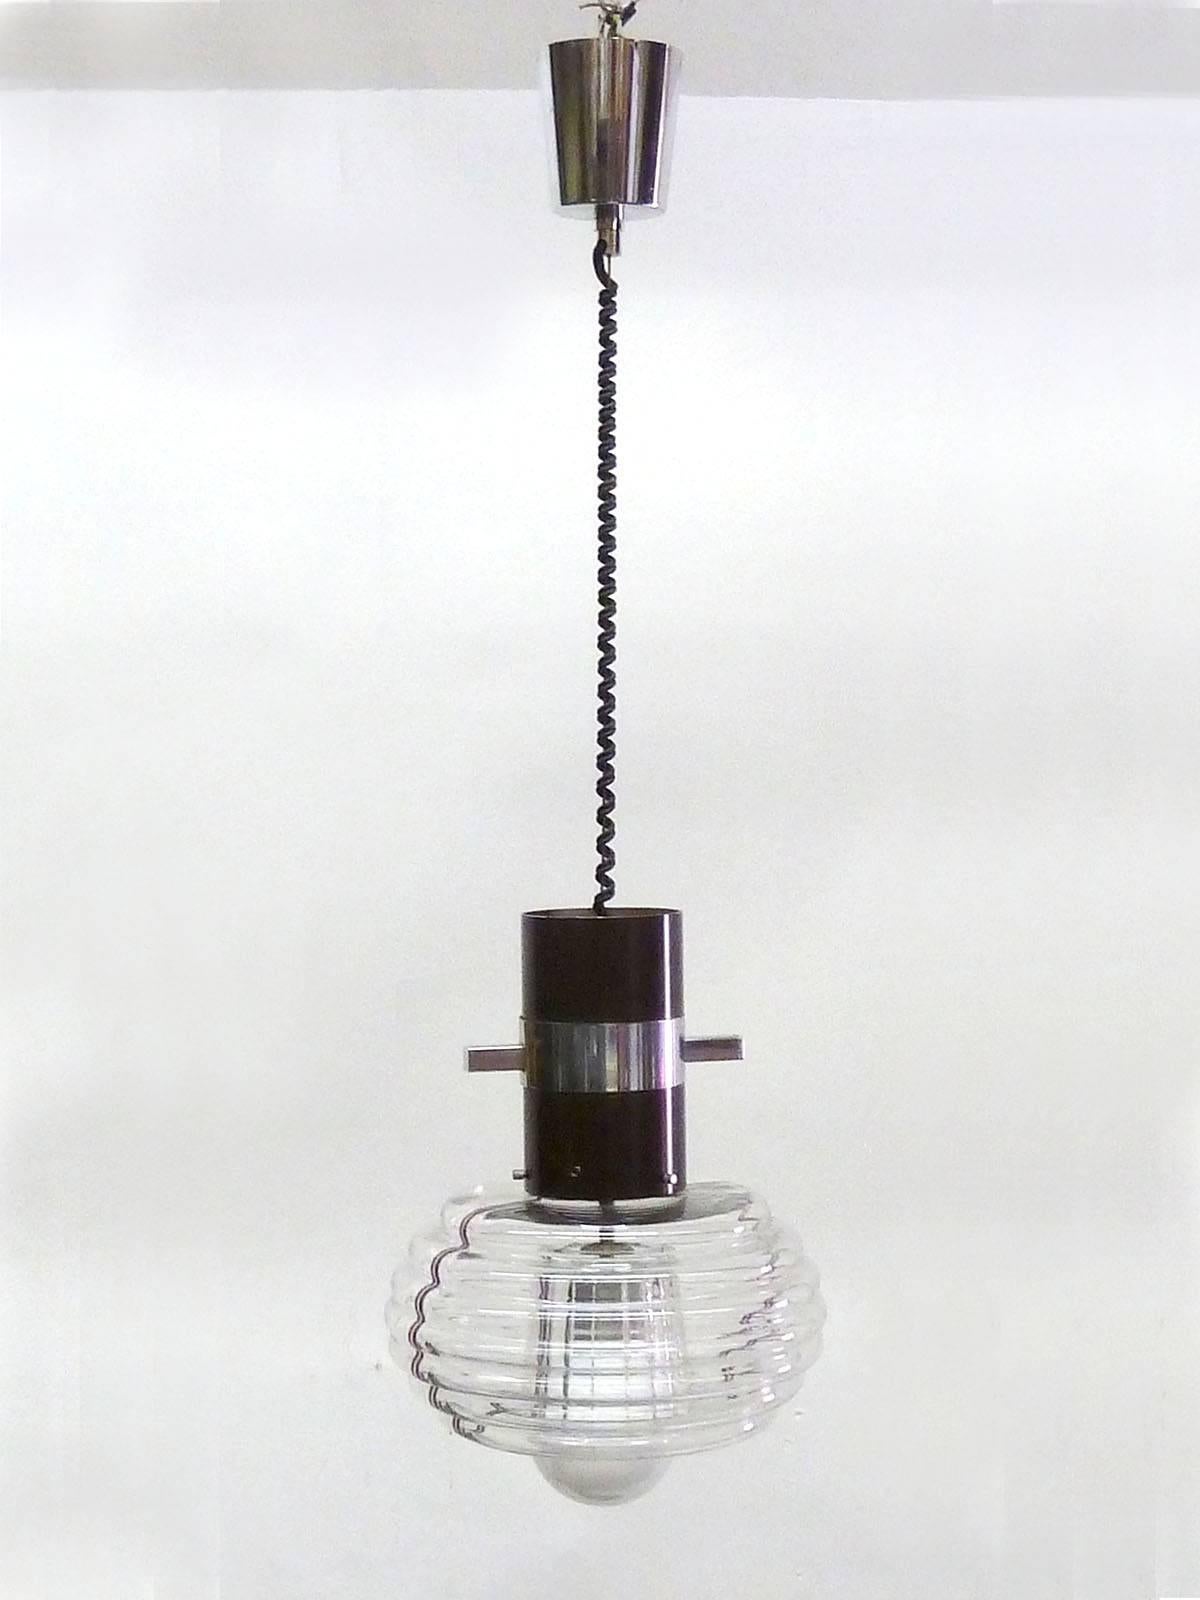 Glass and chrome pendant lamp by Murano, manufactured in the 1960s-1970s.